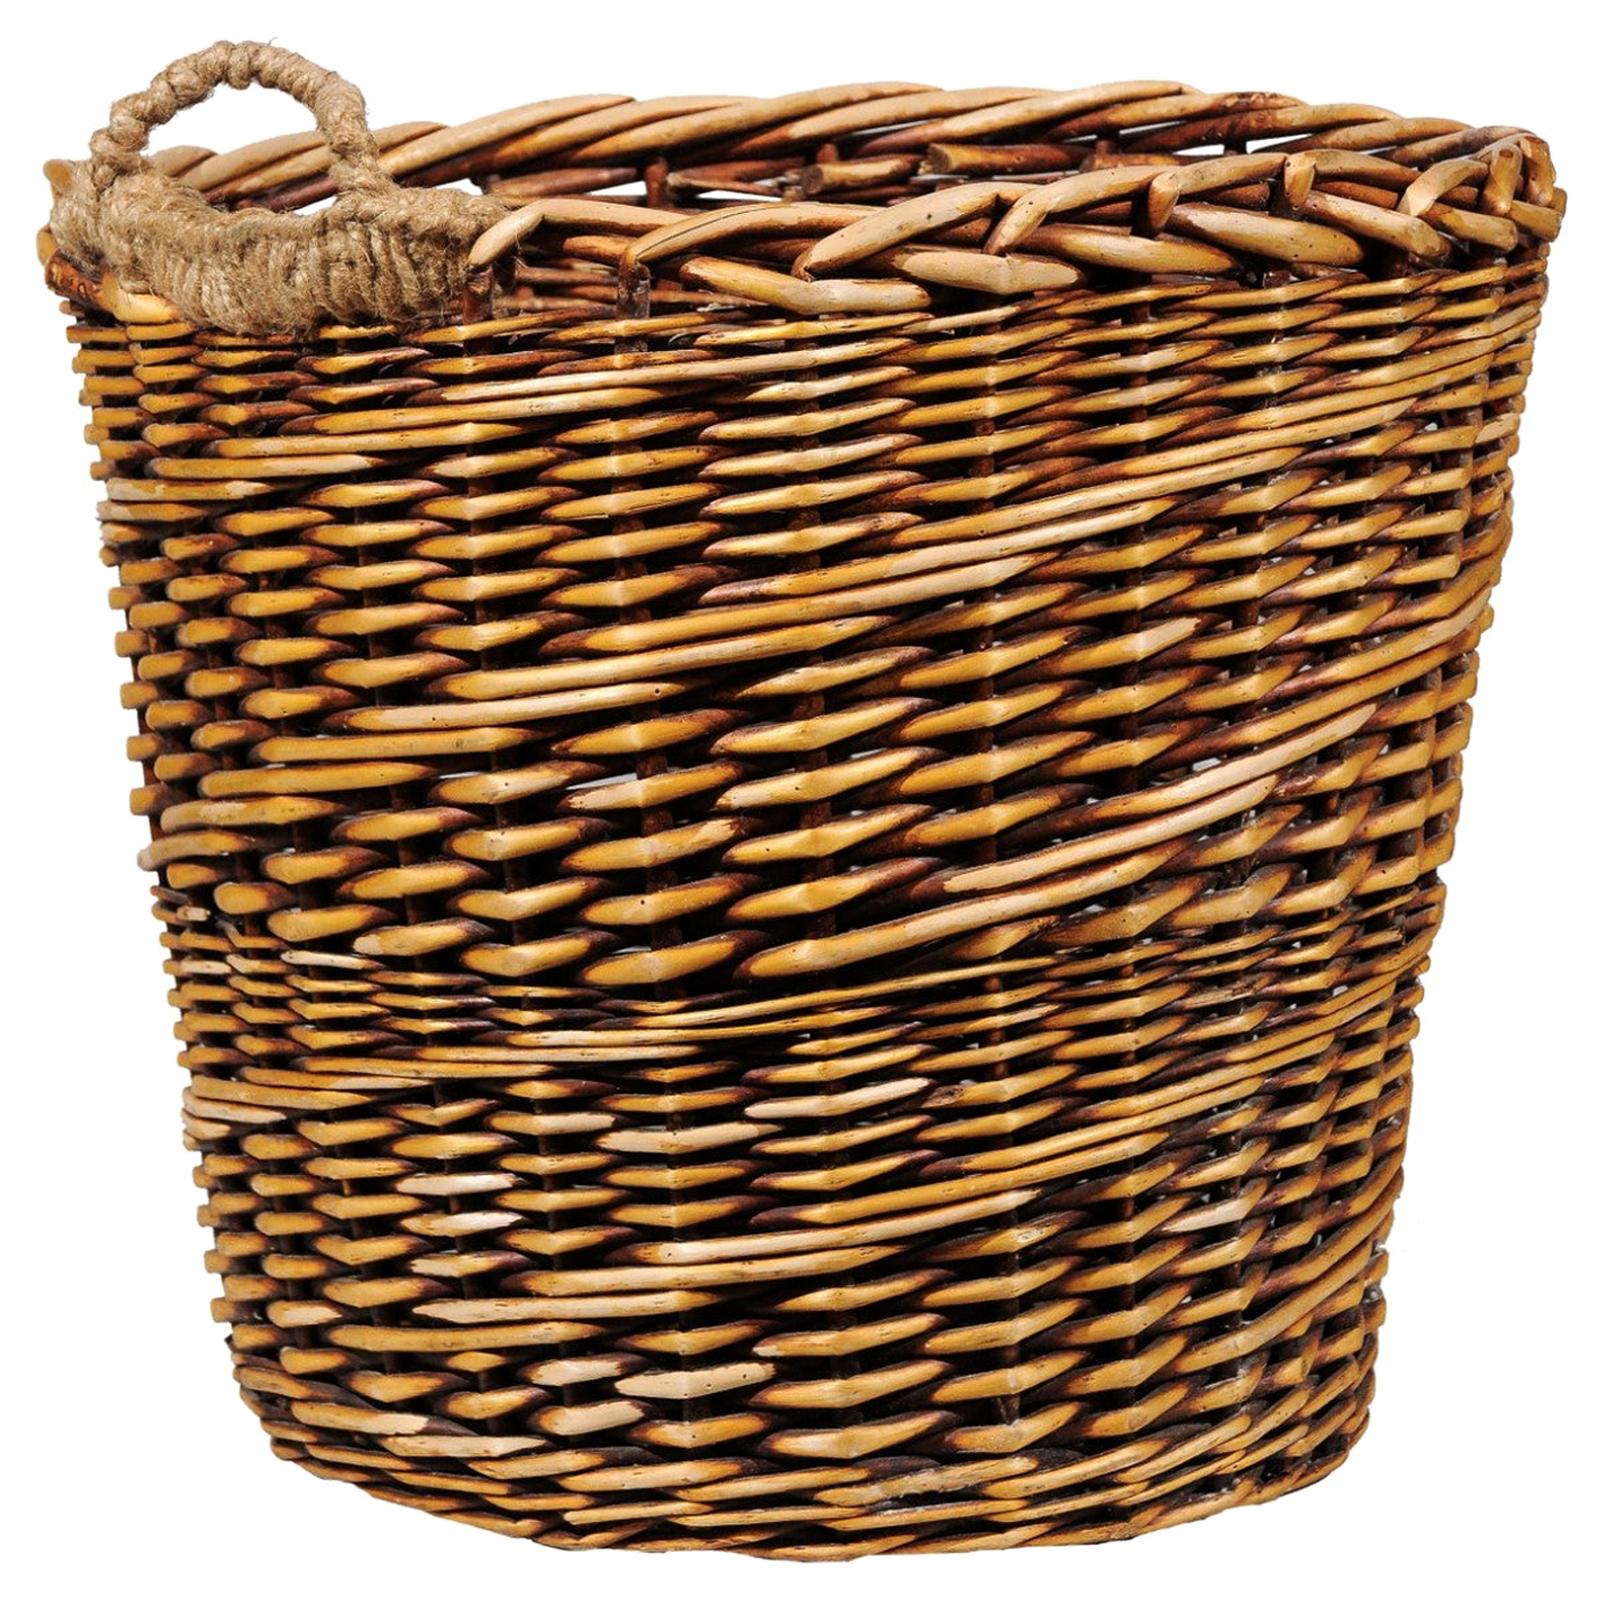 Rustic French Wicker Basket with Single Lateral Handle and Diagonal Patterns